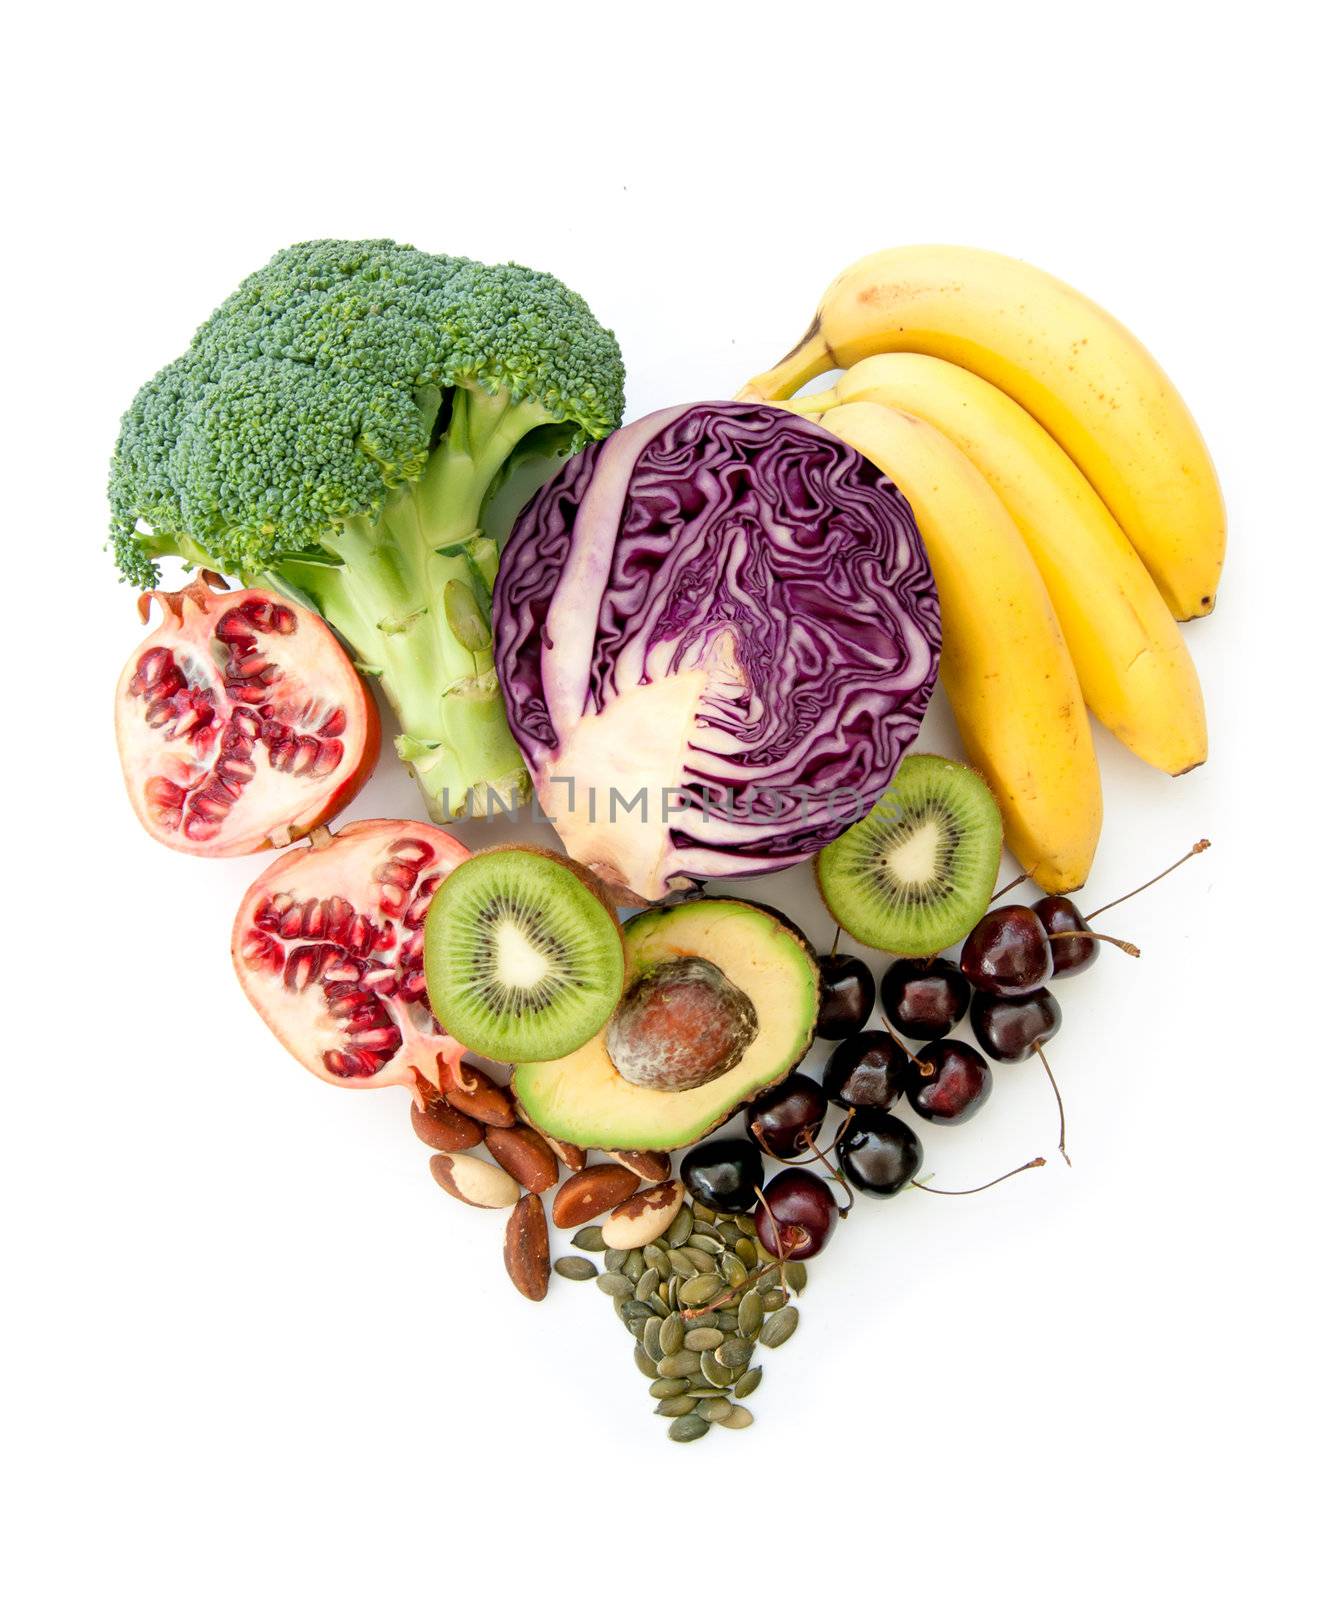 Foods with high nutritional value in a heartshape including red cabbage, avocado and pomegranate